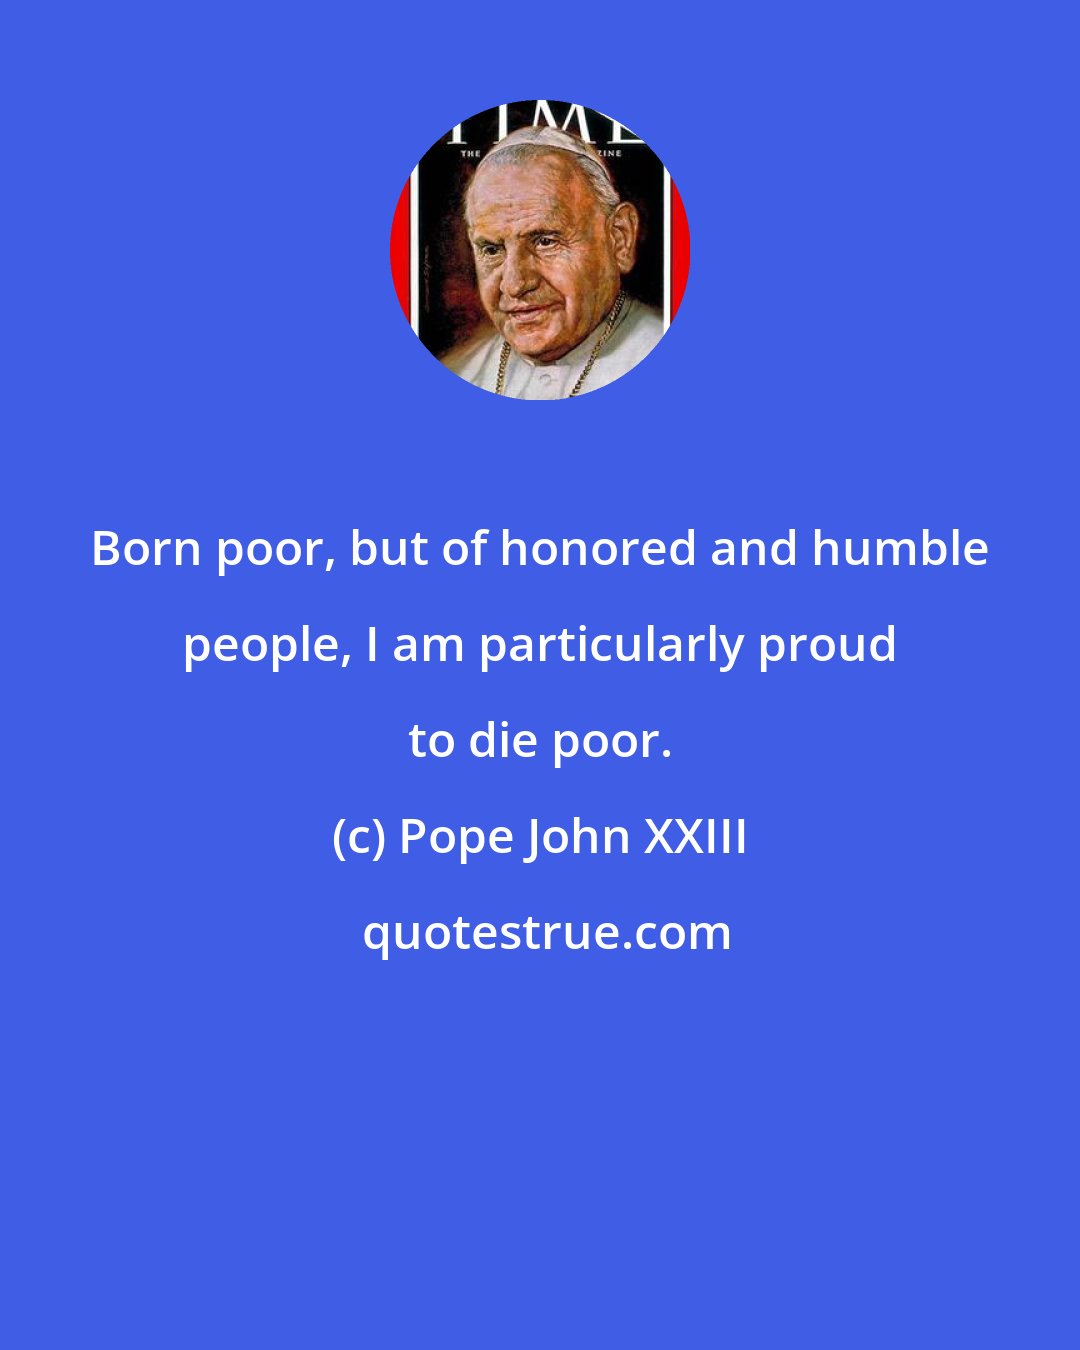 Pope John XXIII: Born poor, but of honored and humble people, I am particularly proud to die poor.